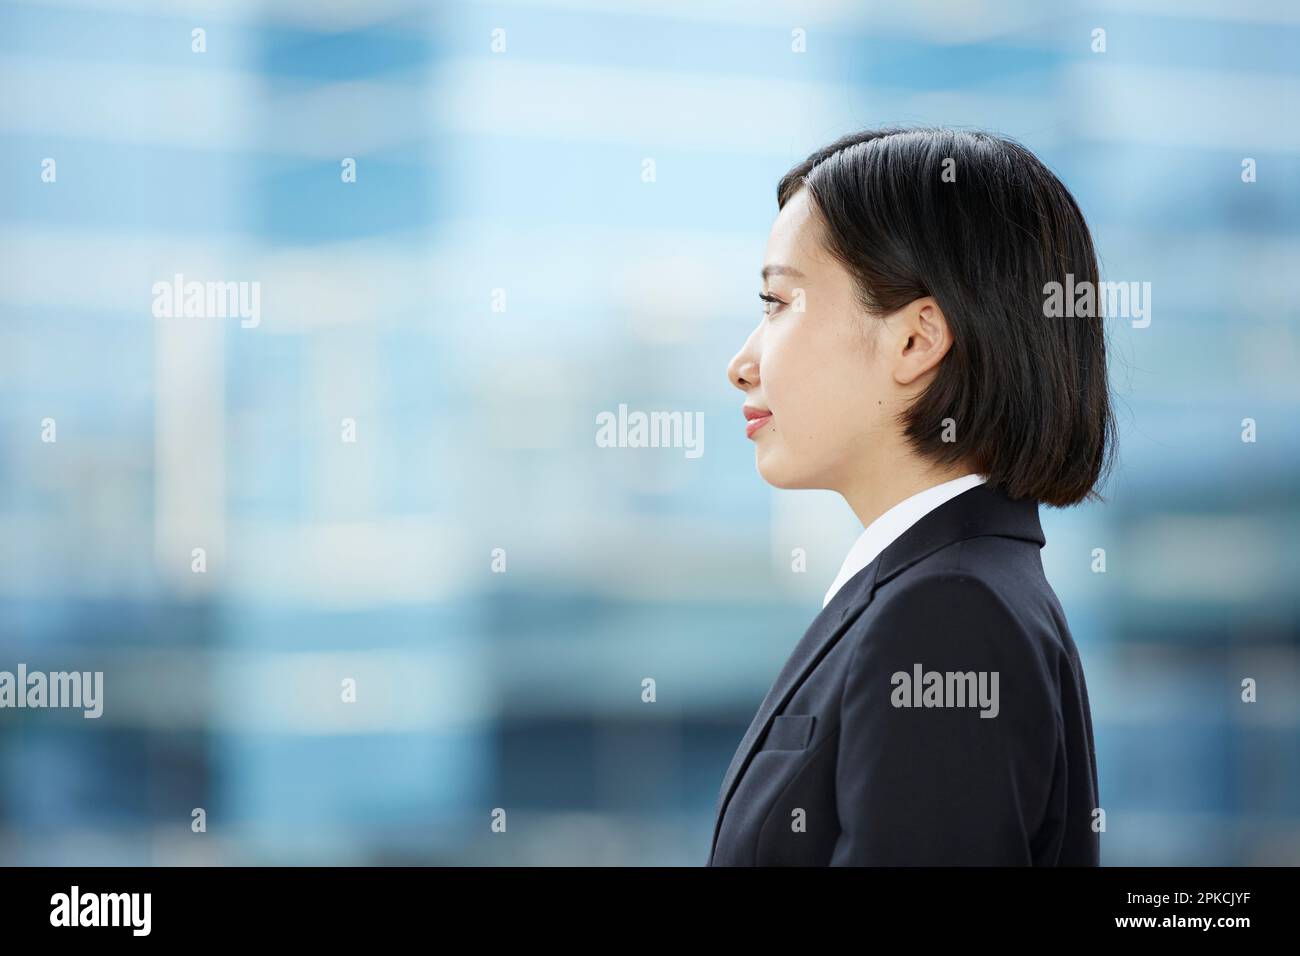 Smiling Woman in Recruit Suit Stock Photo